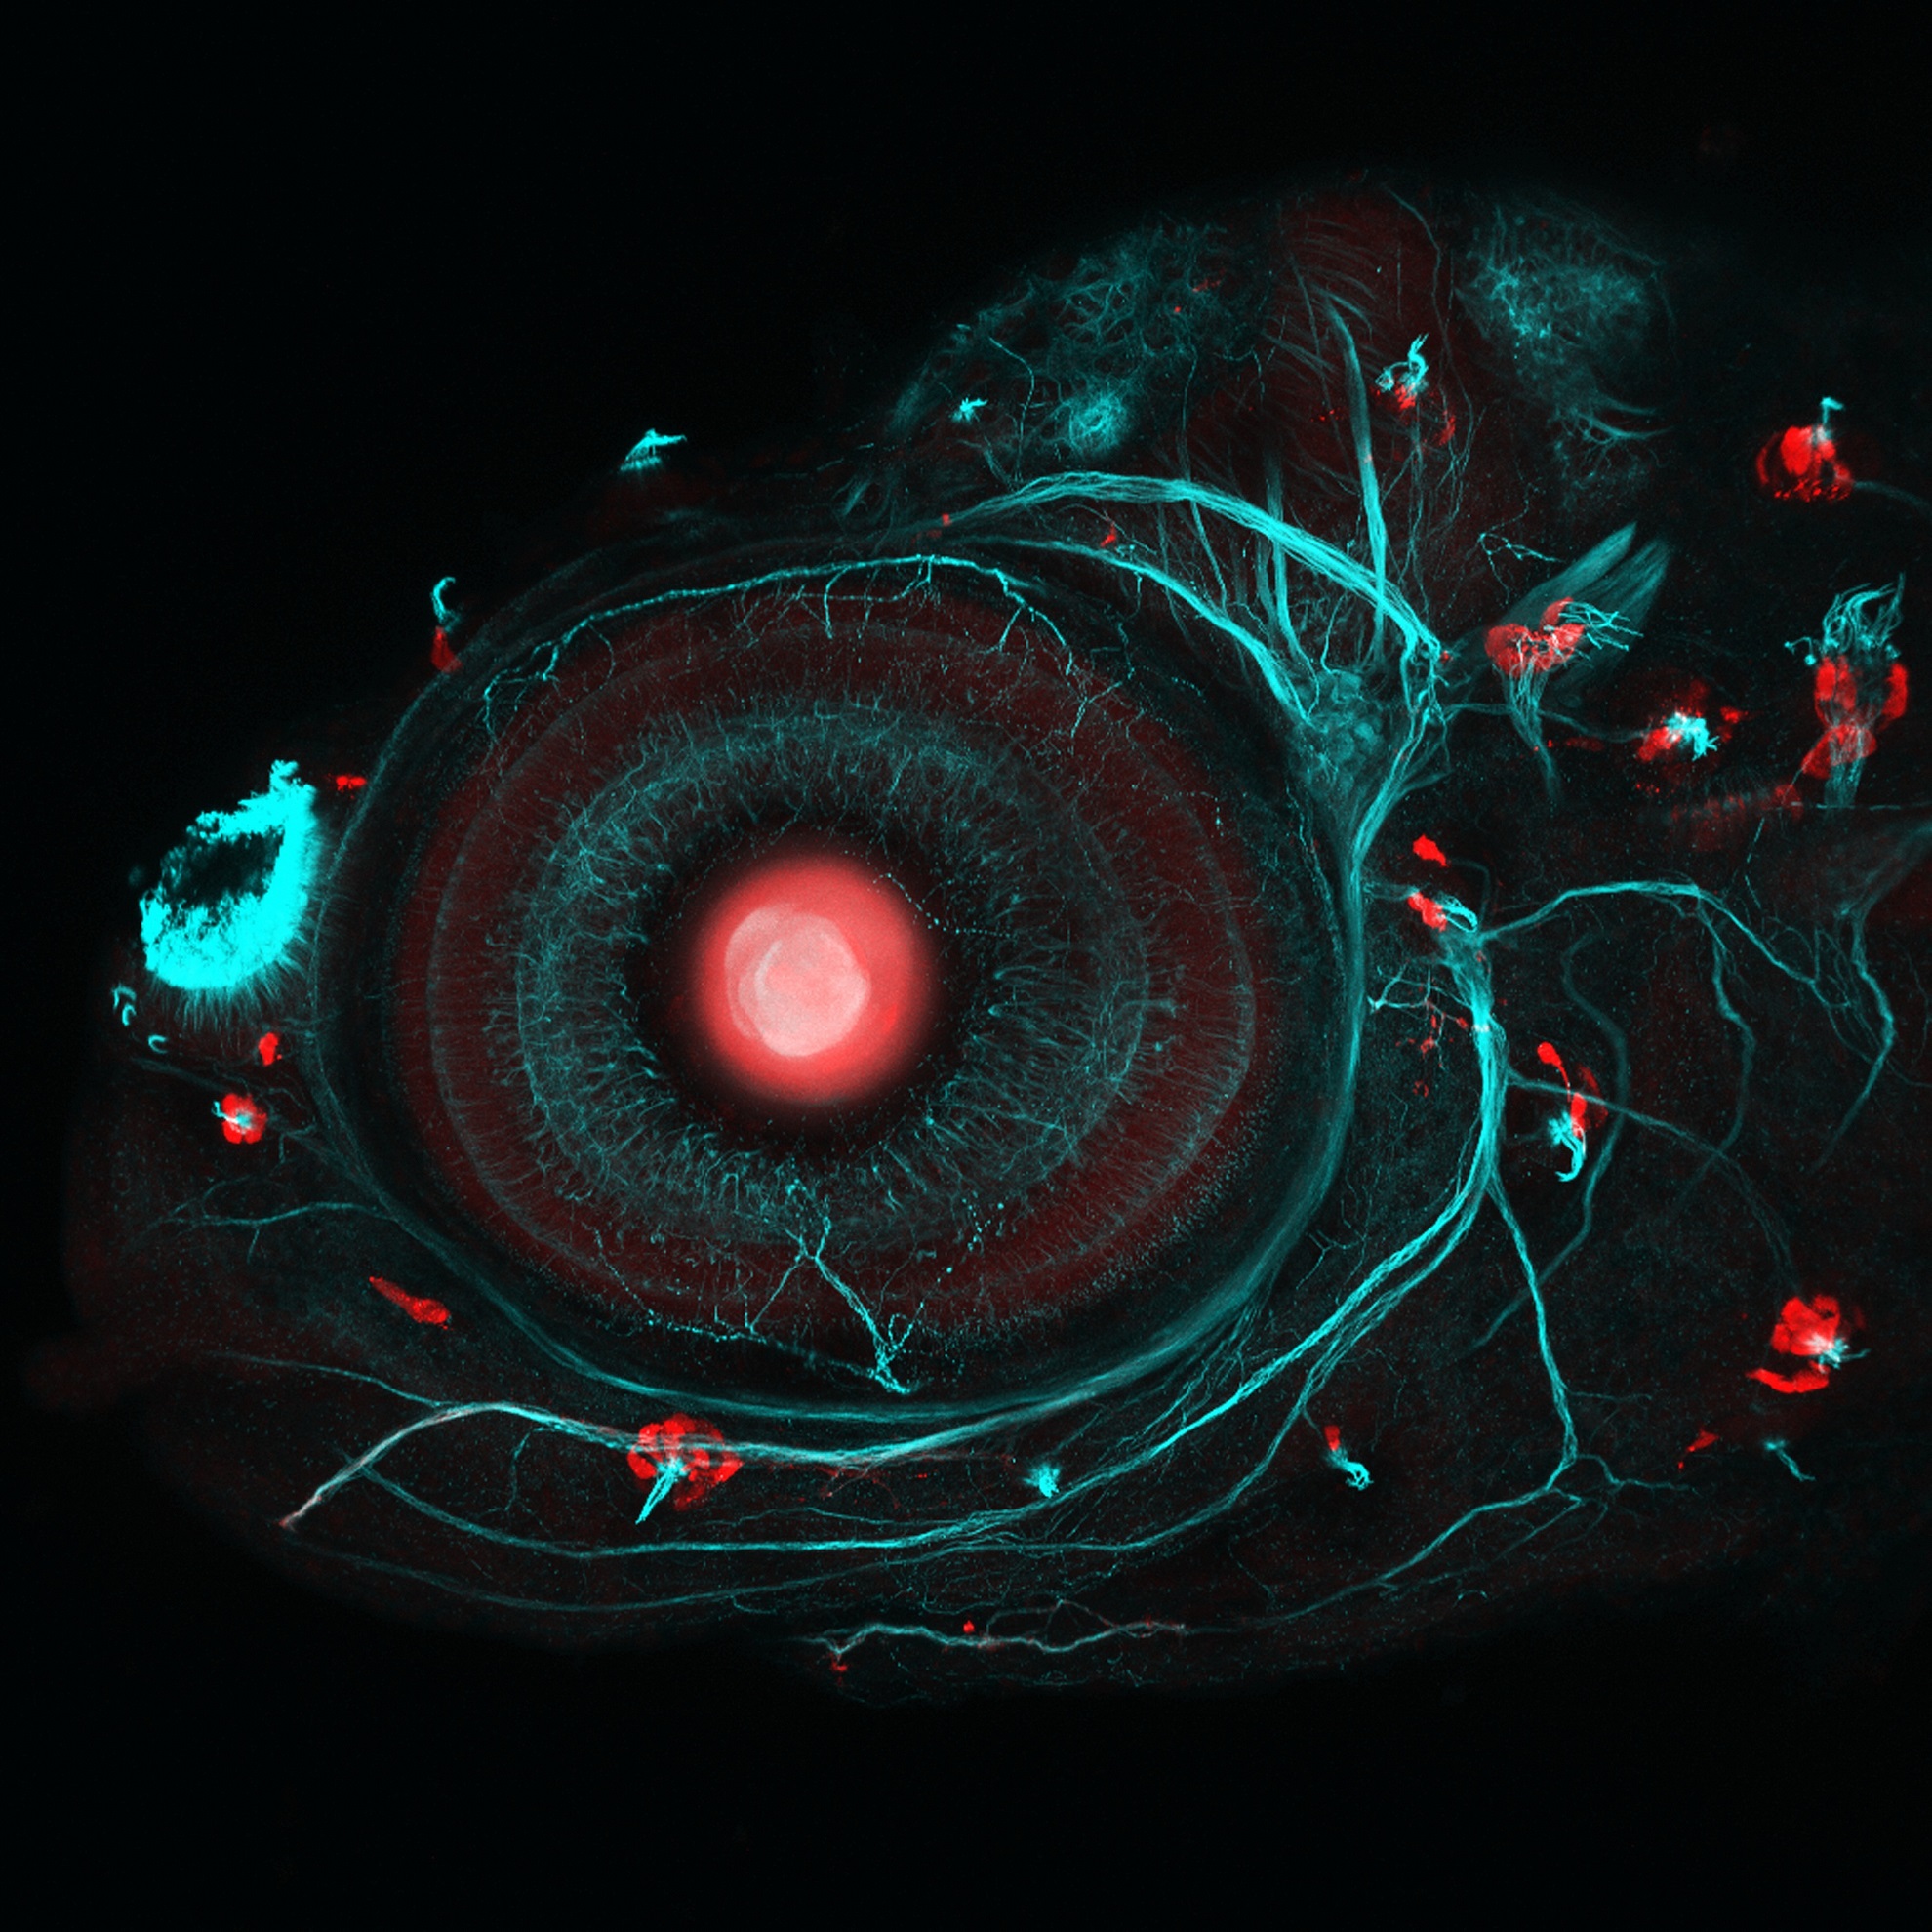 This four-day-old zebrafish embryo has been modified using two mechanisms – borrowed from the fascinating worlds of bacteria and yeast – that are widely applied in genetics research. A DNA-editing technology called CRISPR/Cas9 was used to insert a gene called Gal4 next to the gene that the researchers wished to study. These Gal4 fish were then bred with special reporter fish to create fish where the gene of interest fluoresces red whenever it is activated.